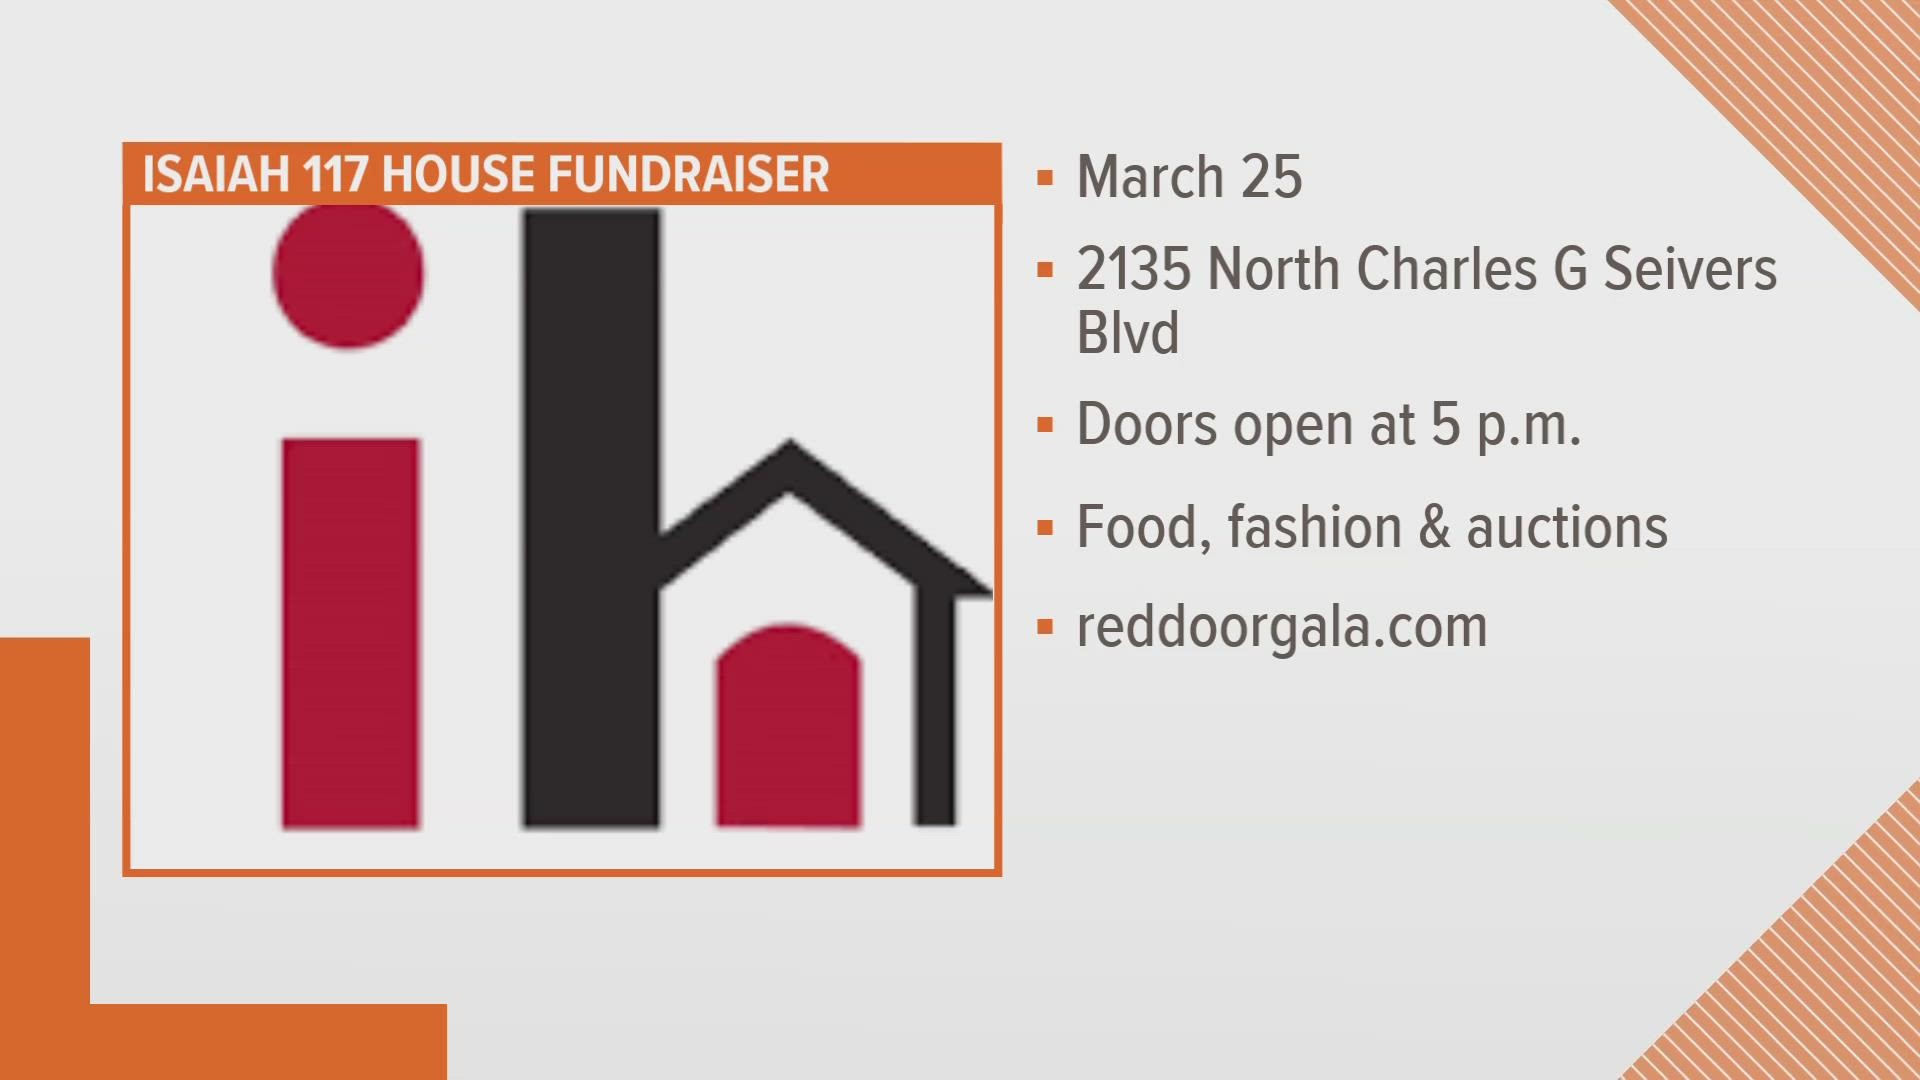 The fundraiser takes place on March 25.